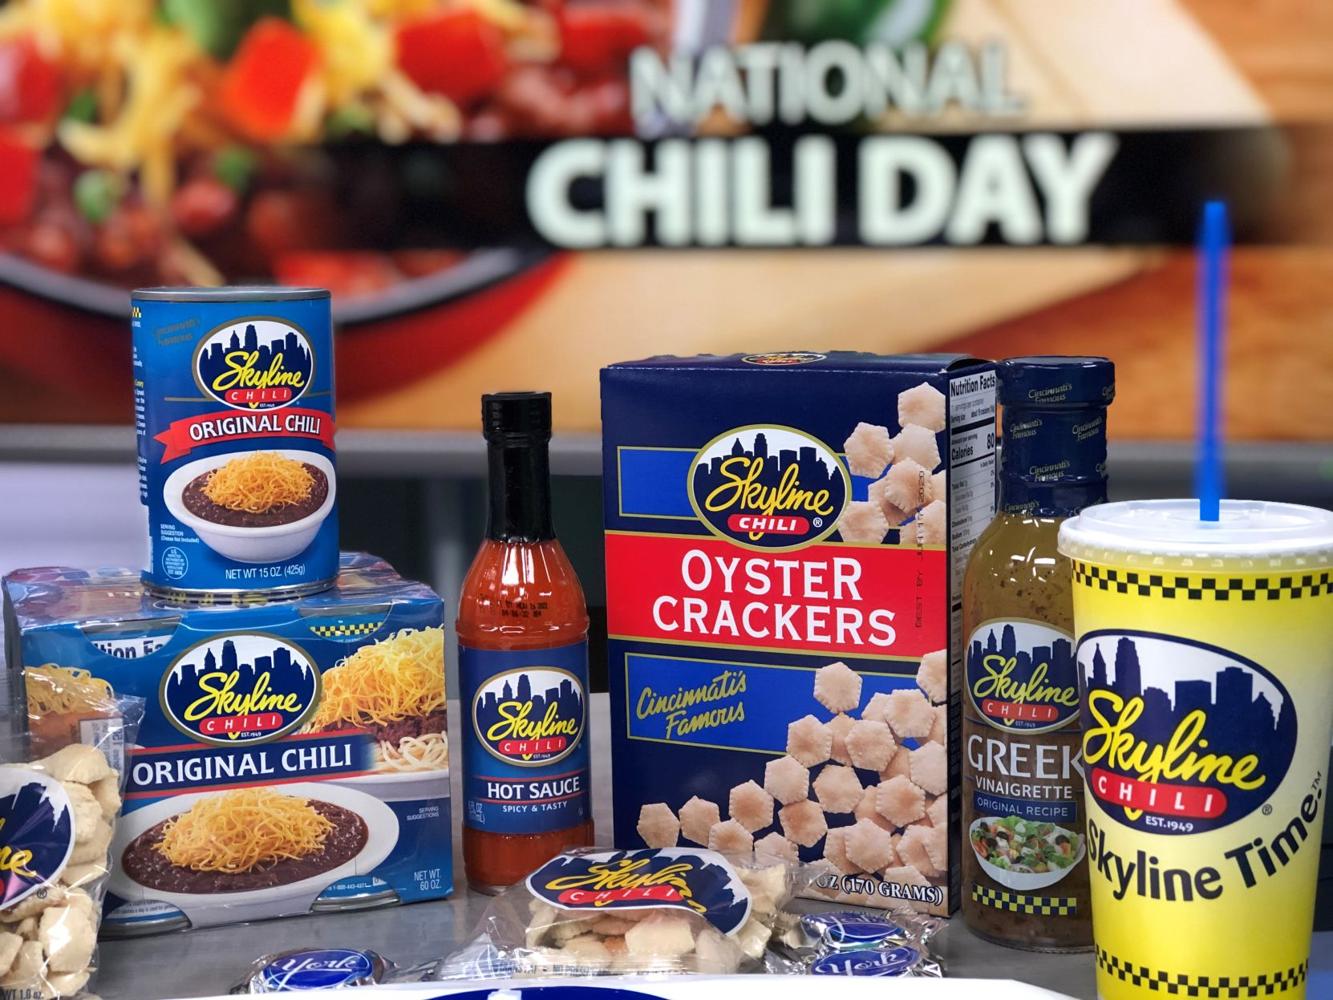 Celebrate National Chili Day with 3ways and Coneys Morning